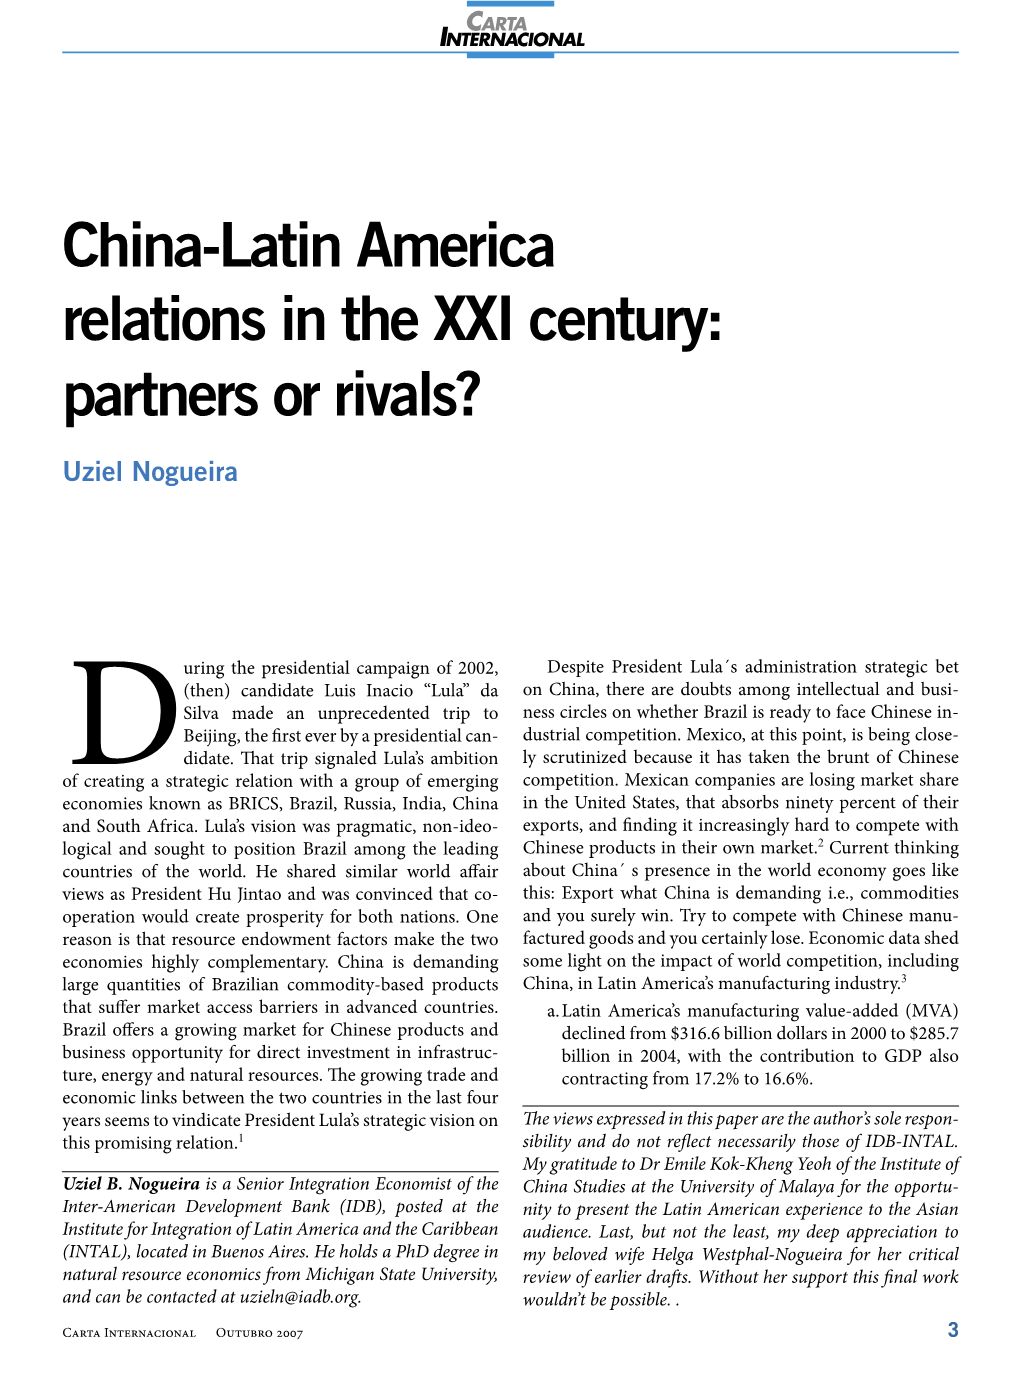 China-Latin America Relations in the XXI Century: Partners Or Rivals?